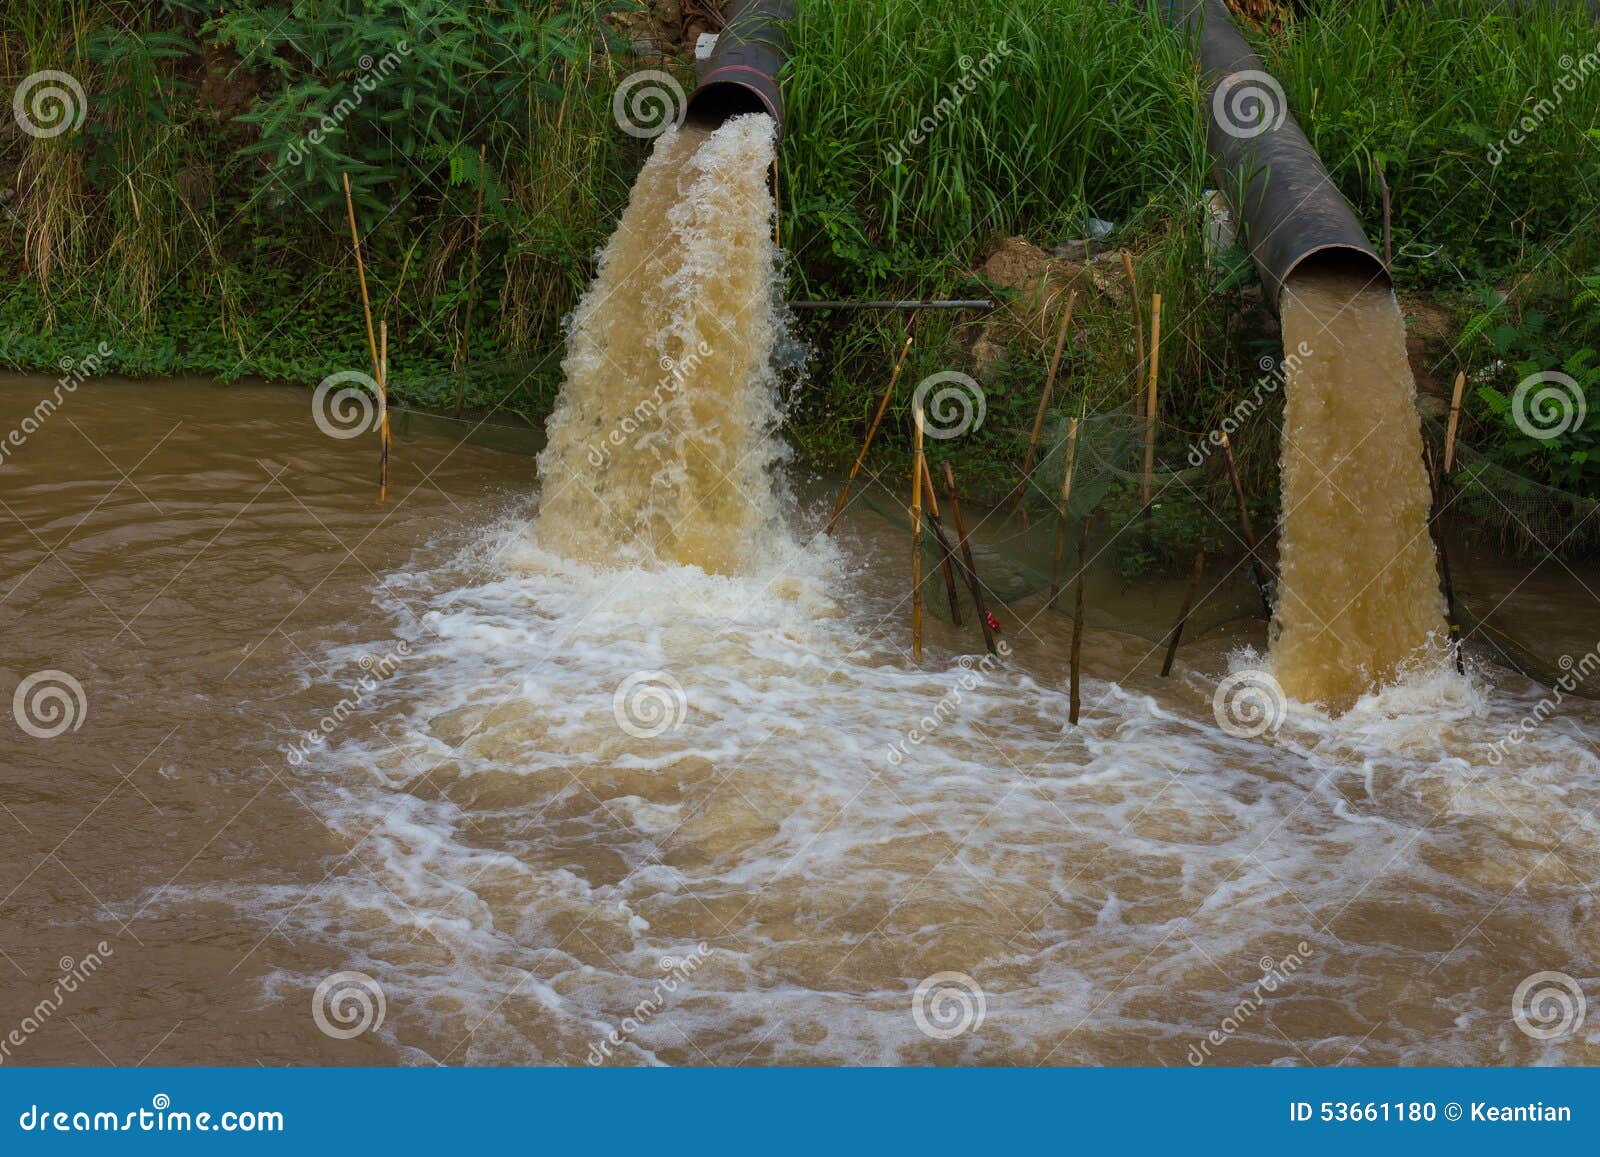 Water flow stops sewer. stock photo. Image of pollution - 53661180